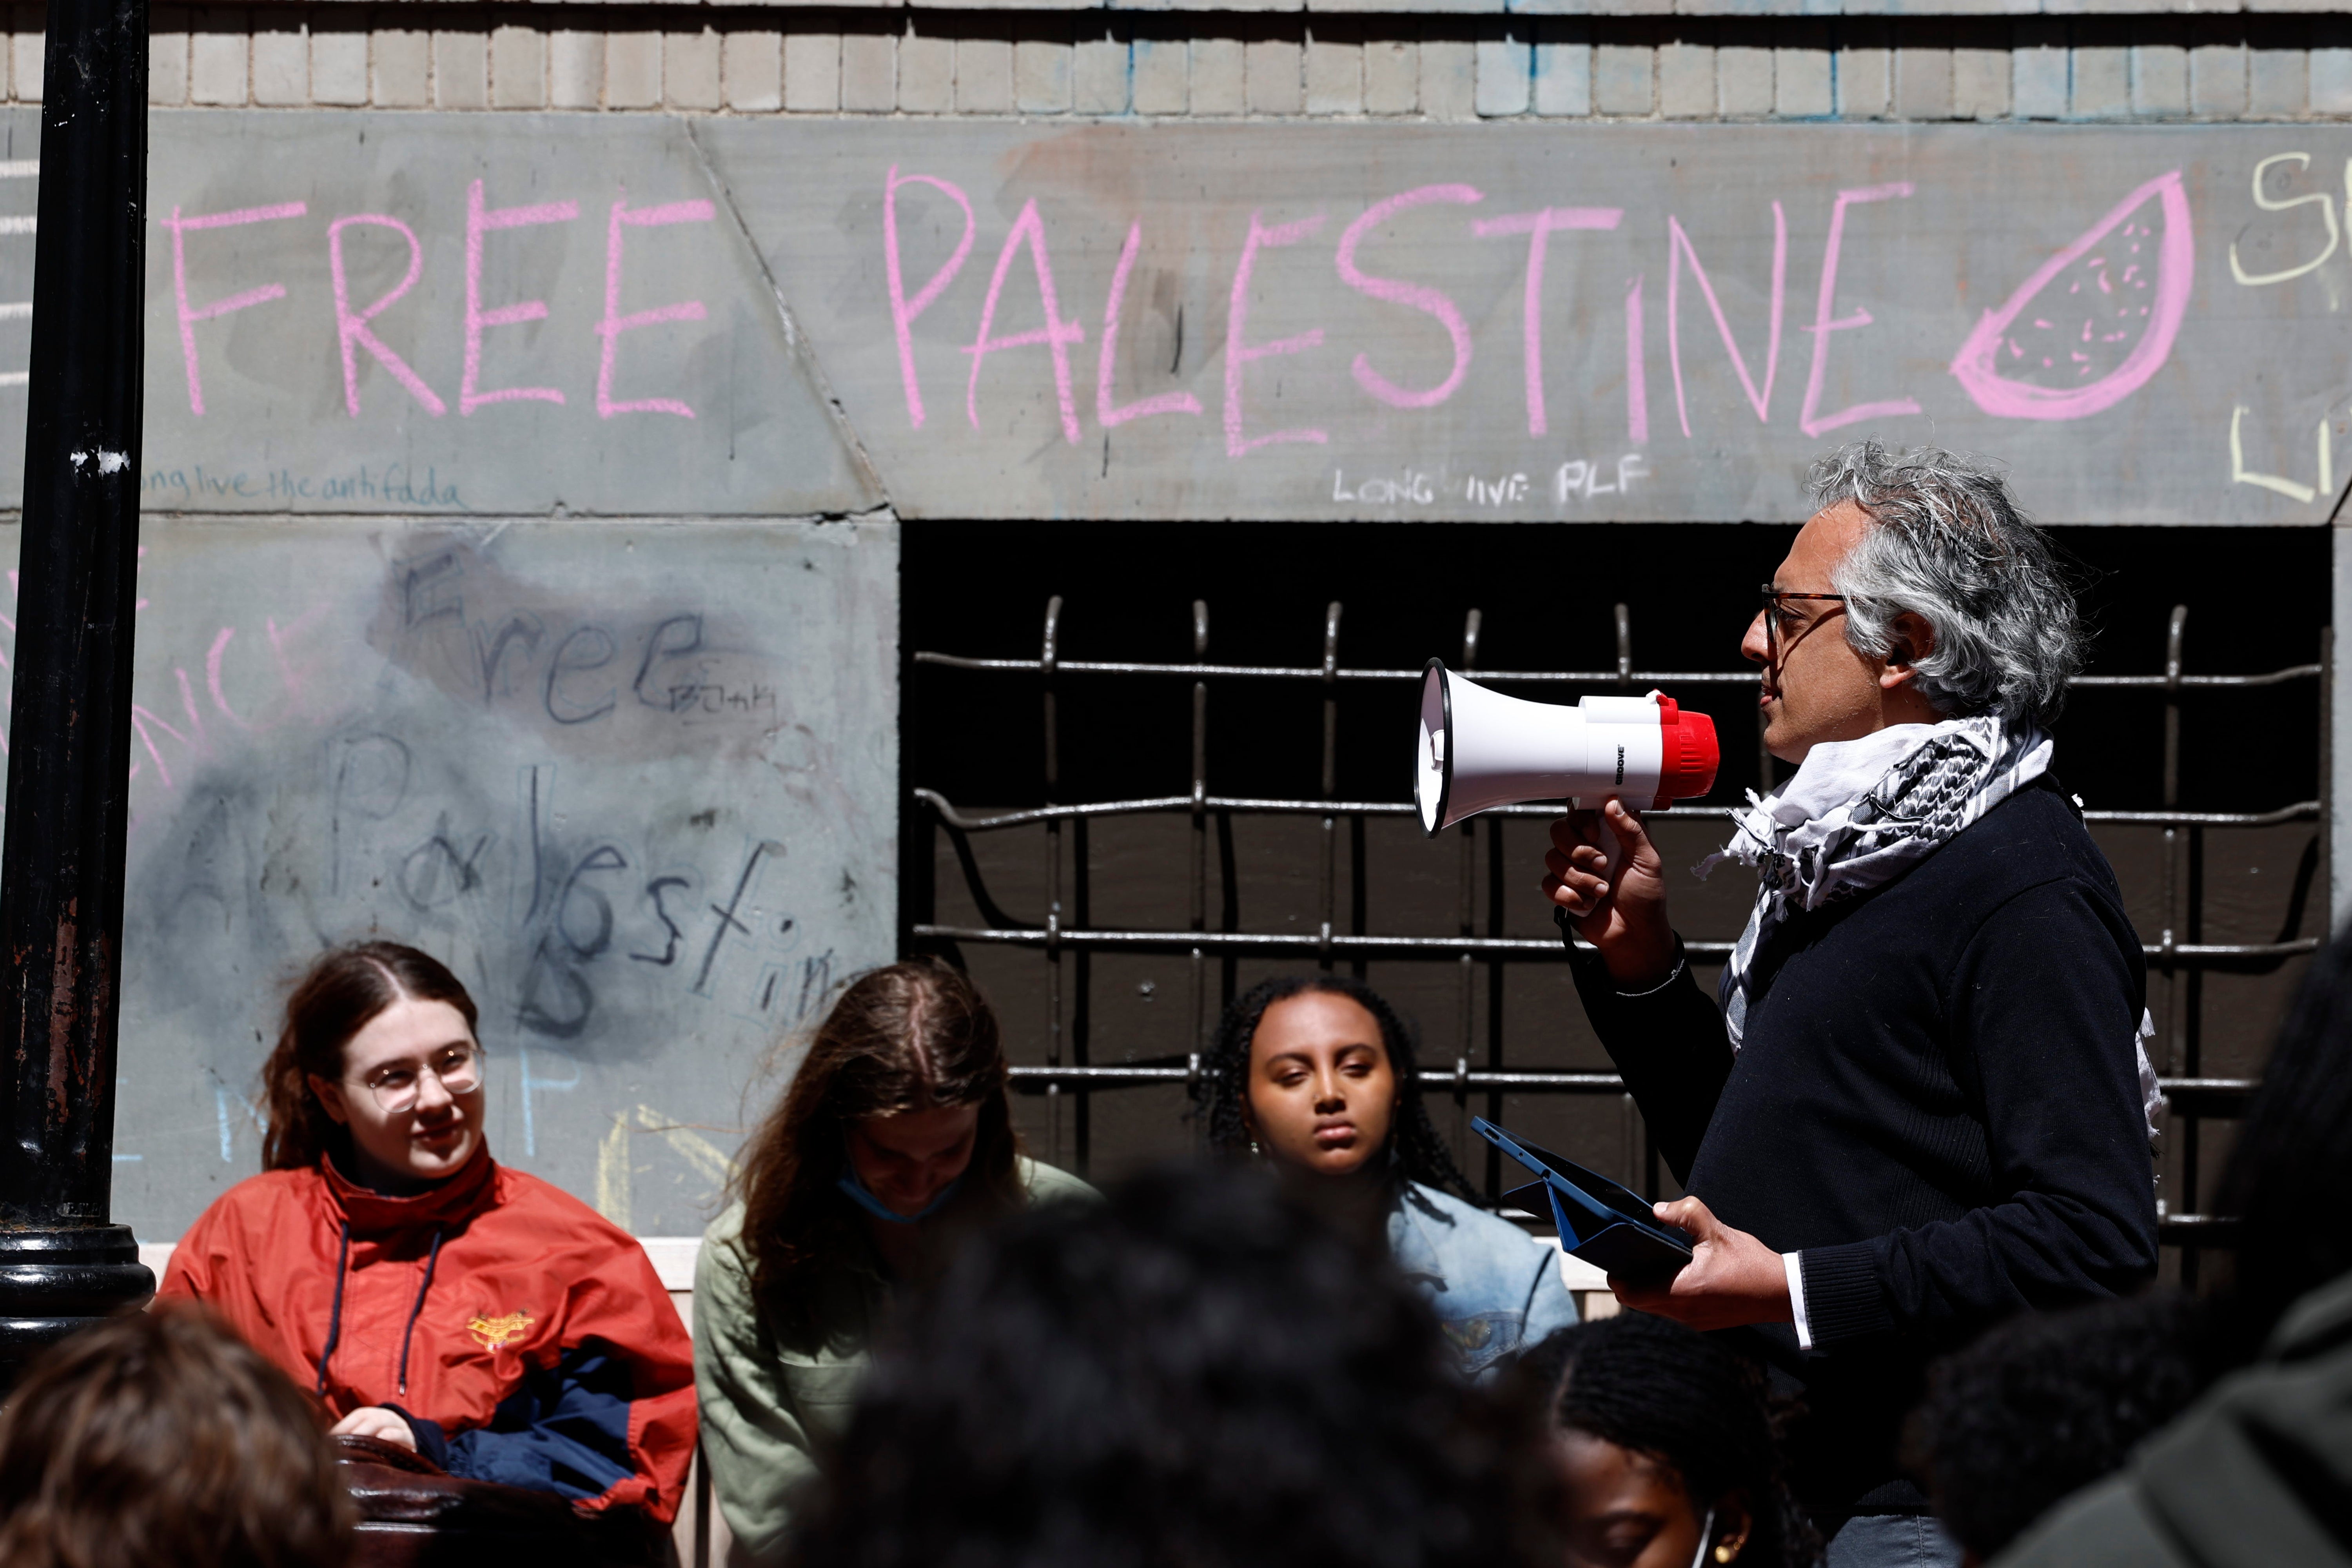 Students at Emerson College listen to a speaker as they occupy a 'tent city' in an alley adjacent to the college campus as they protest Emerson's ties to Israel, in Boston, Massachusetts, USA, 22 April 2024